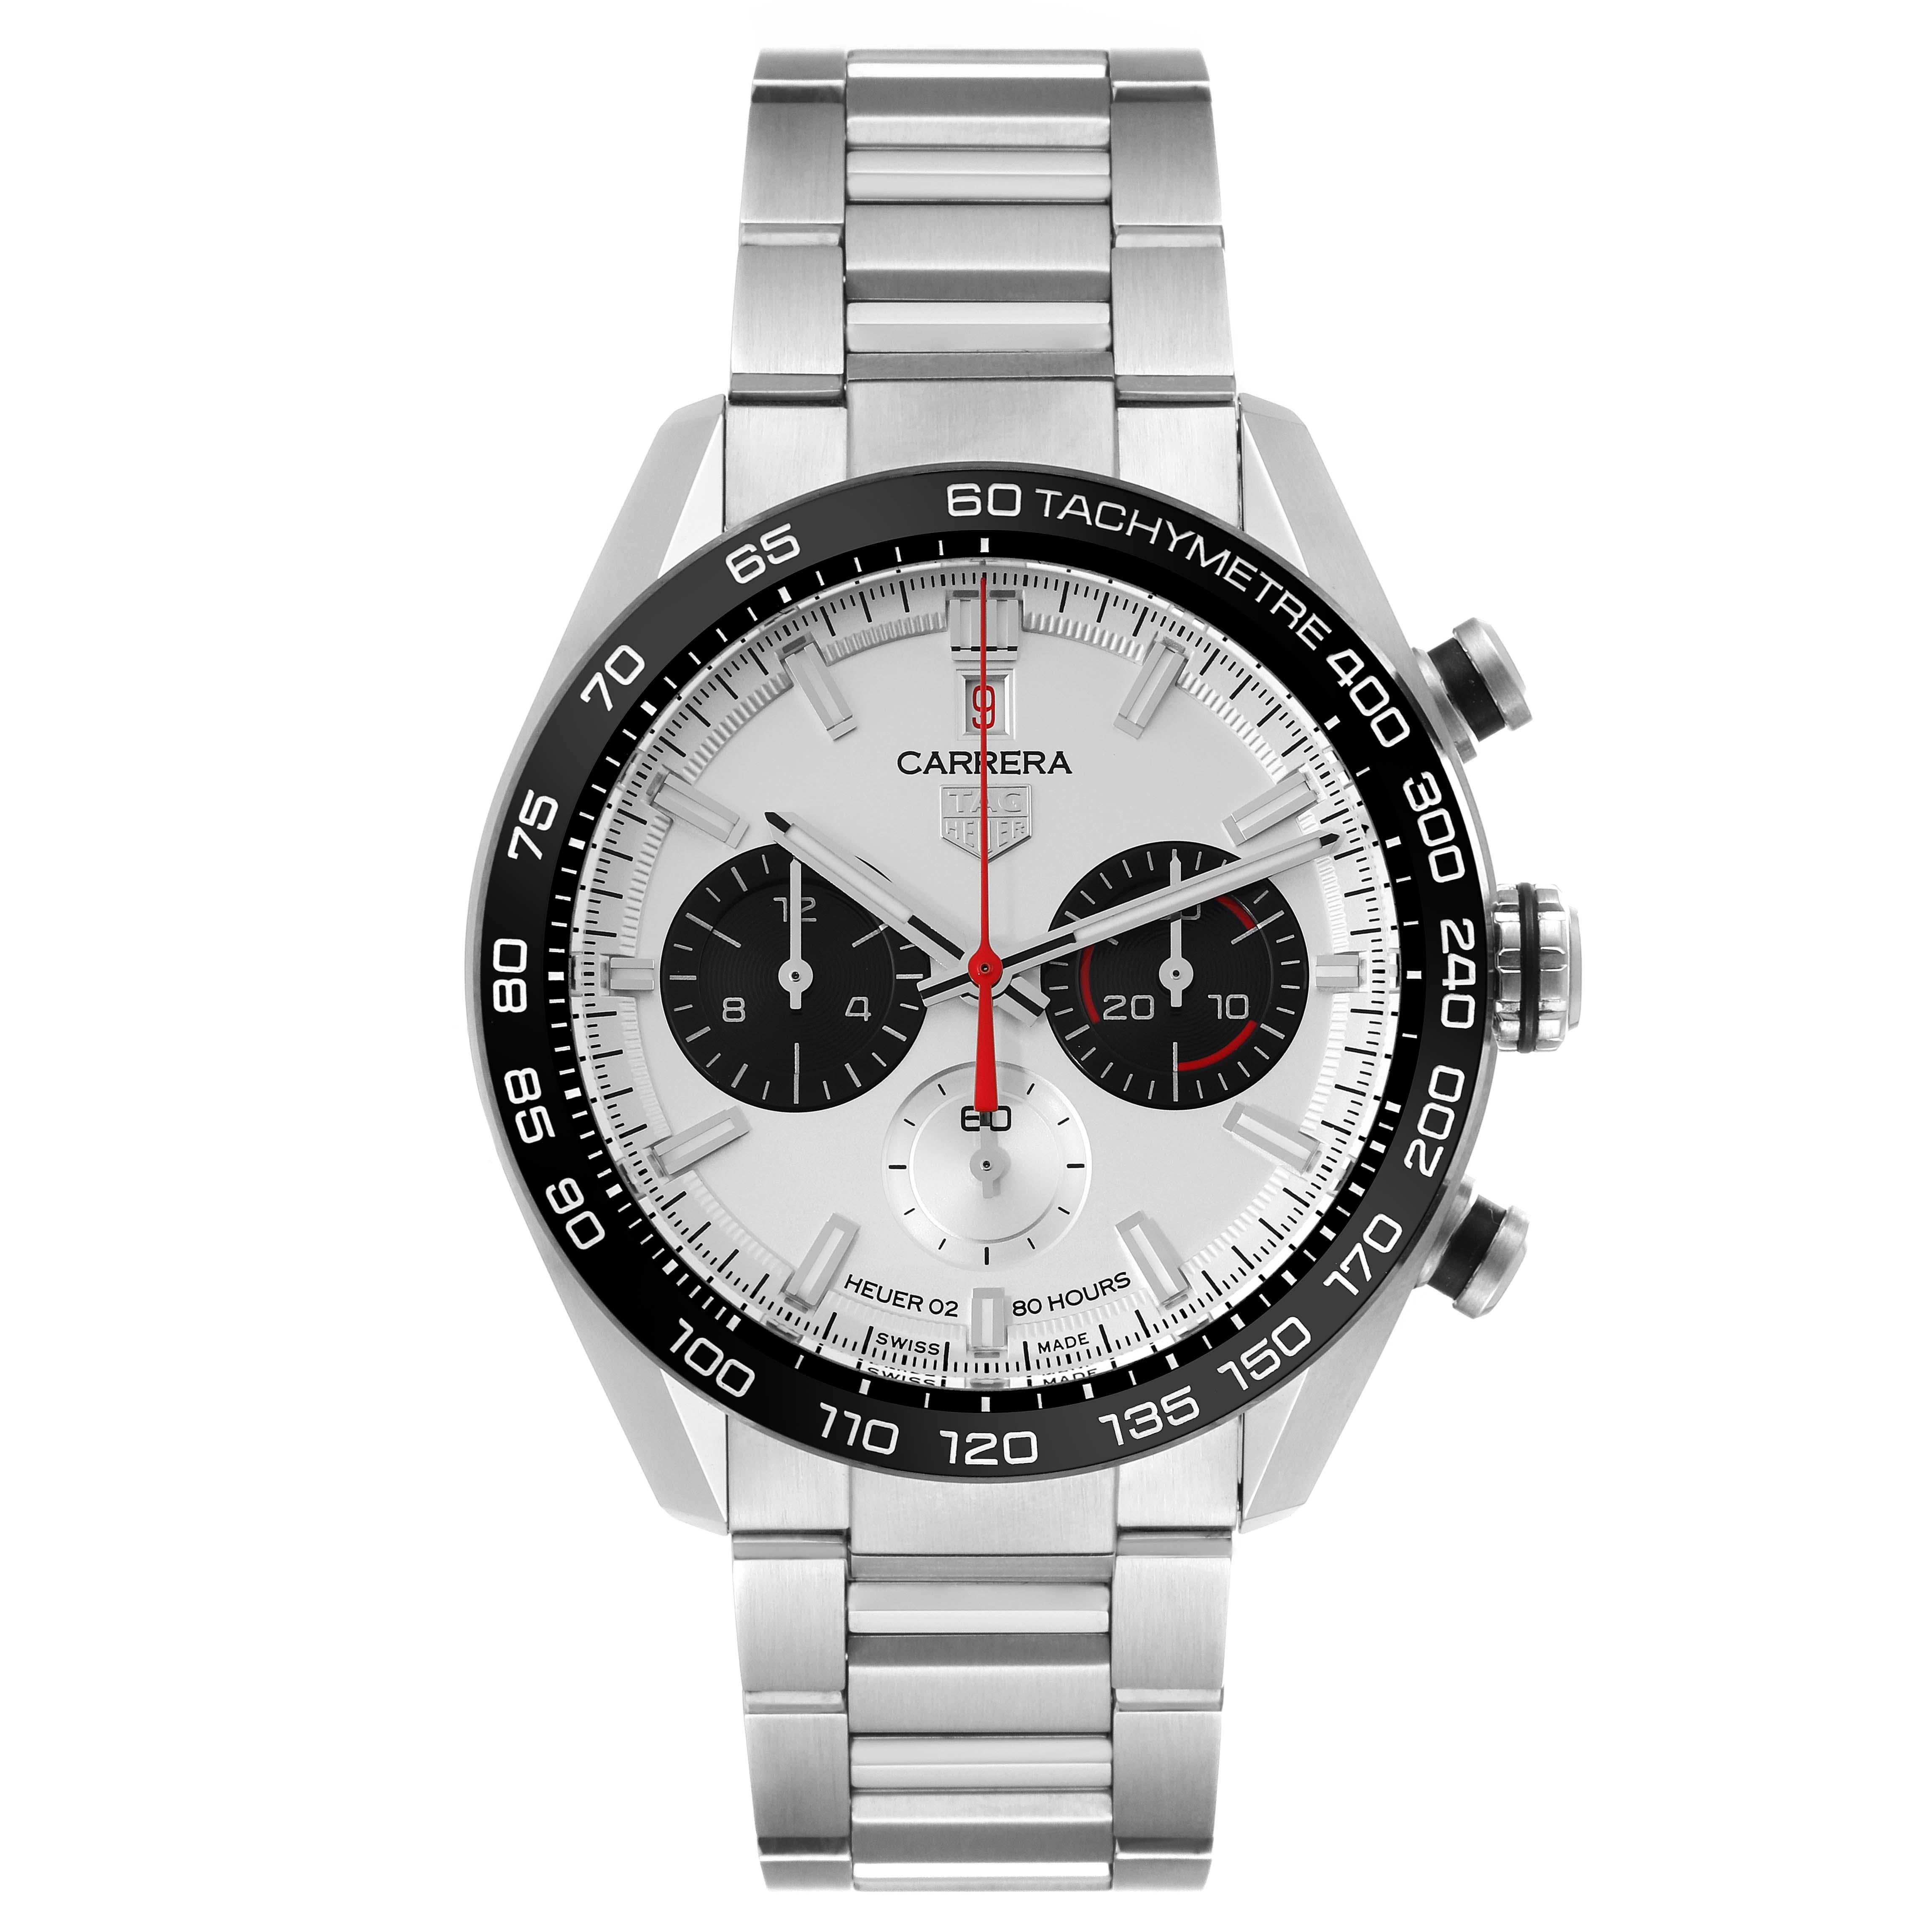 Tag Heuer Carrera Anniversary LE Steel Silver Dial Mens Watch CBN2A1D Box Card. Automatic self-winding chronograph movement. Stainless steel round case 44.0 mm. Transperent sapphire crystal back. Black ceramic tachymeter scale bezel. Scratch